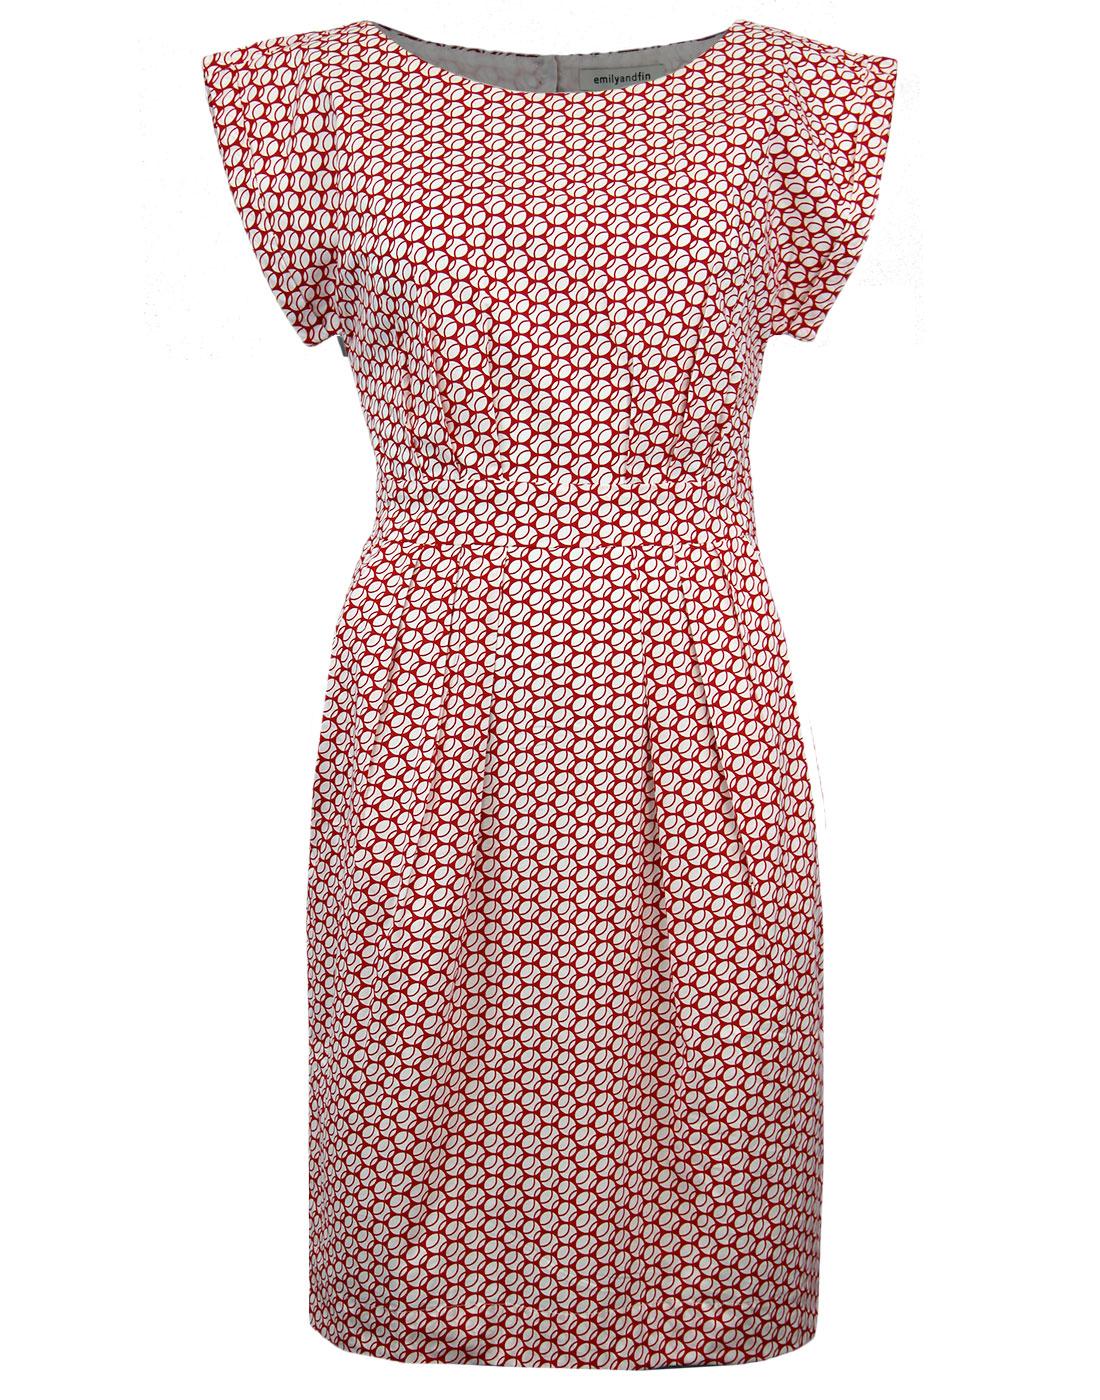 EMILY AND FIN Sophie Retro Sixties Op Art Dress in Red/White